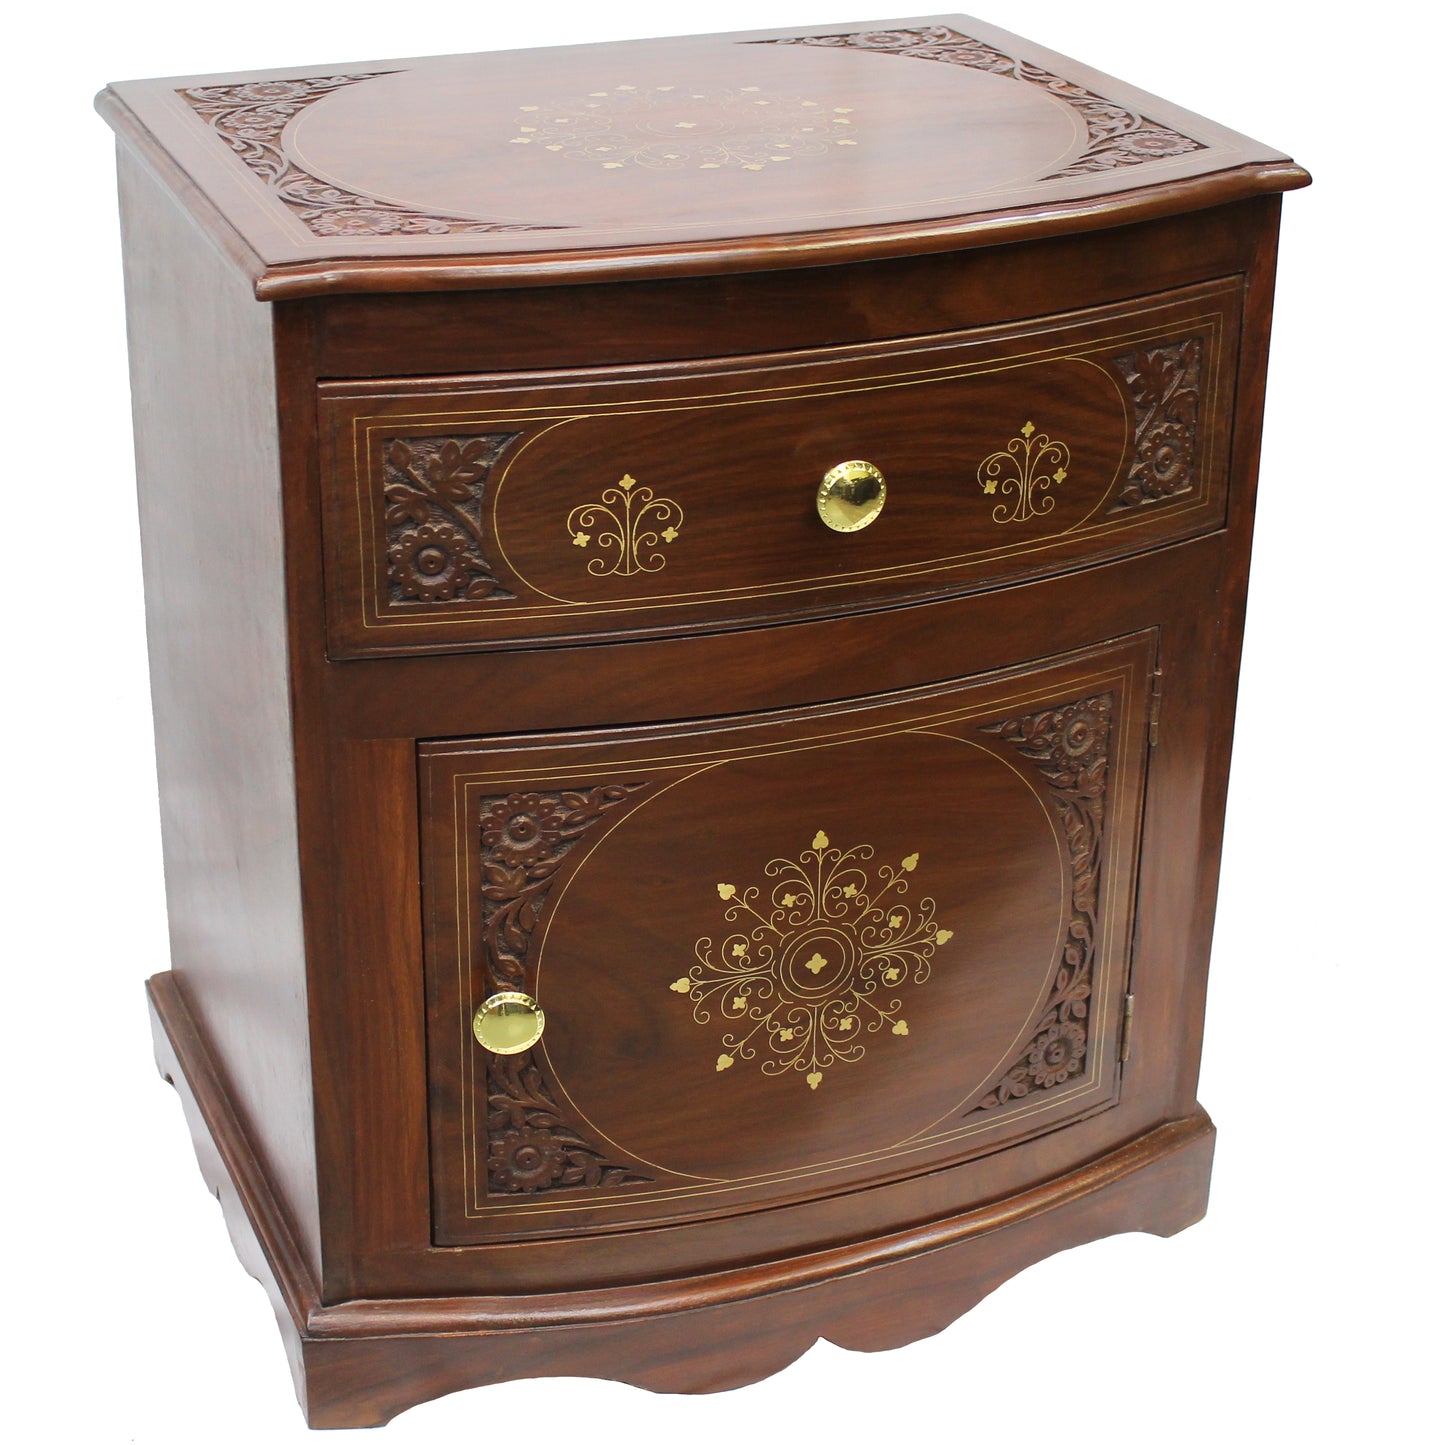 Natural Geo Decorative Rosewood Curved Wooden End Table with Drawer & Cabinet